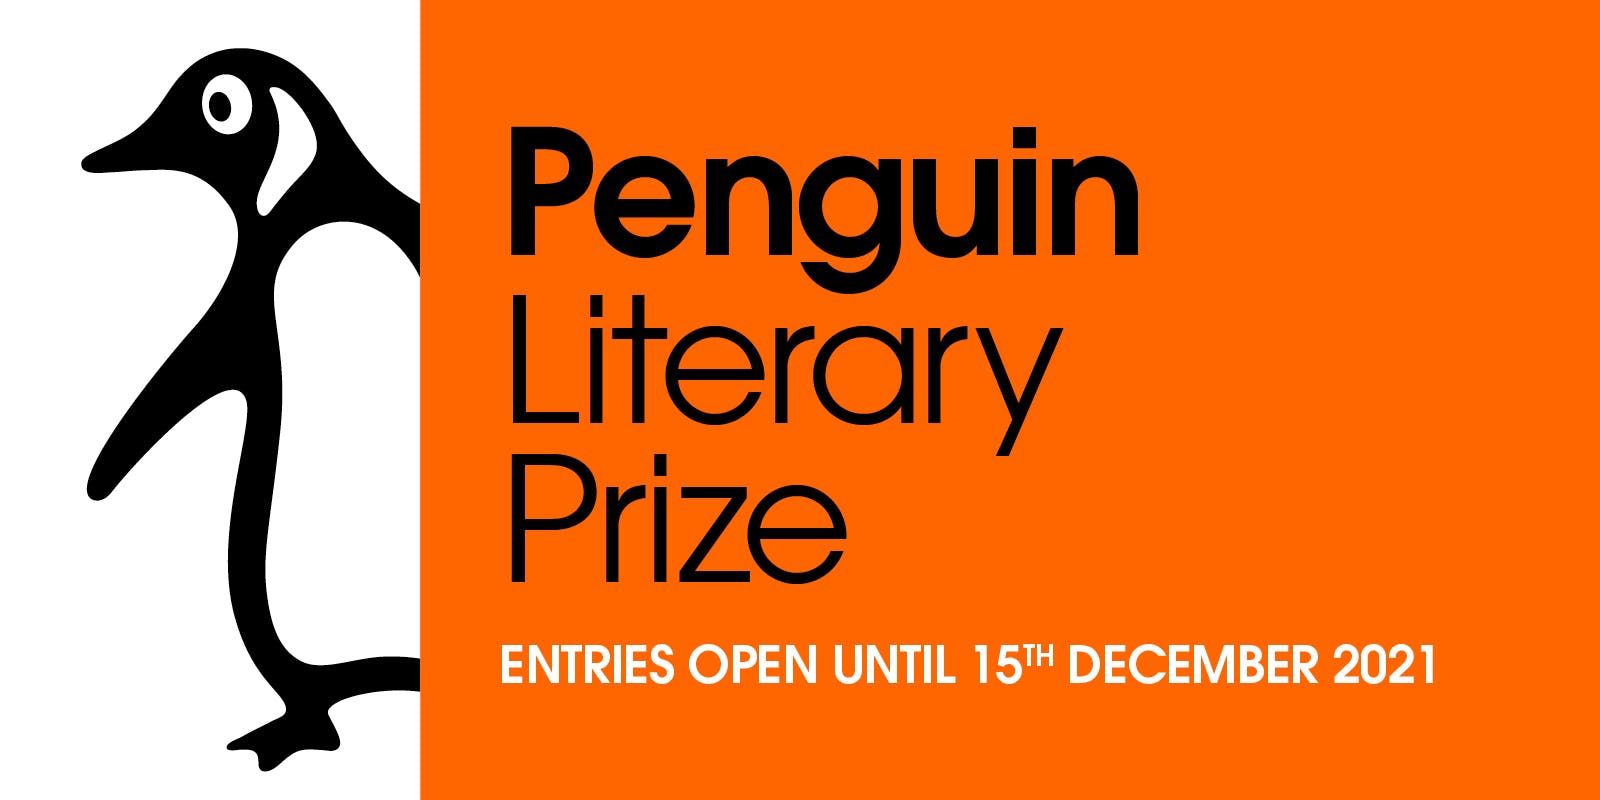 Submissions open for the 2022 Penguin Literary Prize